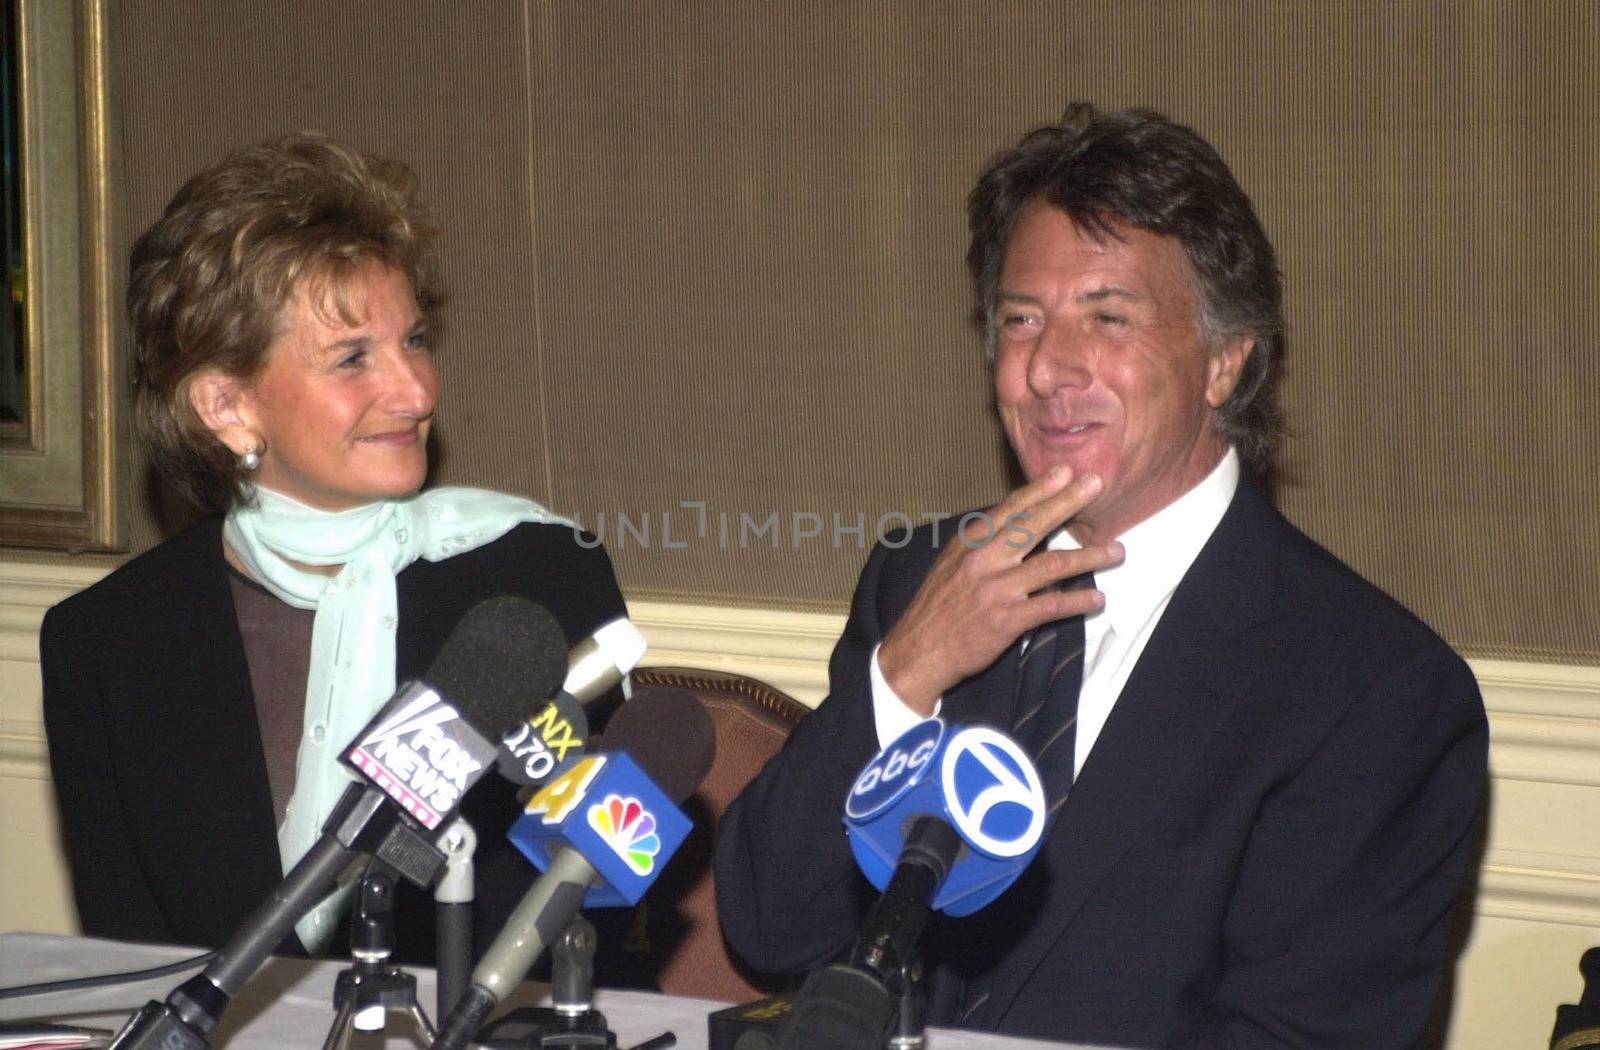 U.S. Ambassador Nancy Hirsch Rubin and Dustin Hoffman at the "Erasing The Stigma" presentation of awards to members of the media who have provided accurate portrayals of mental illness. 04-28-00